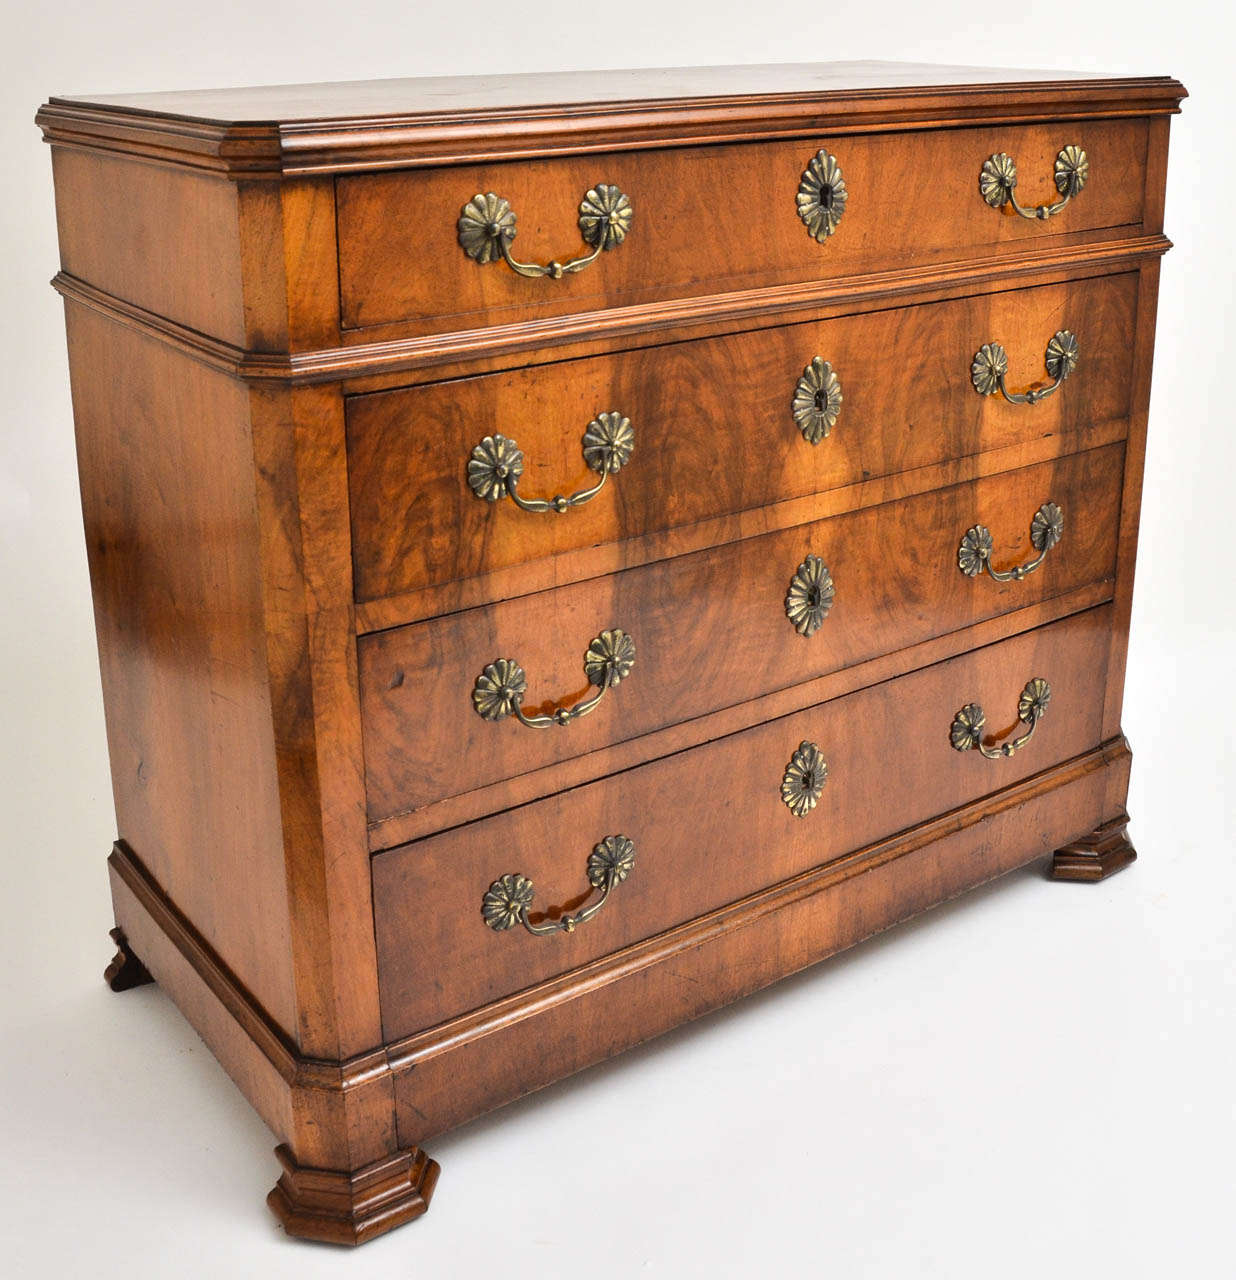 A handsome early 19th Century chest with four drawers, beautiful sunburst brass hardware, centered corners and molded legs